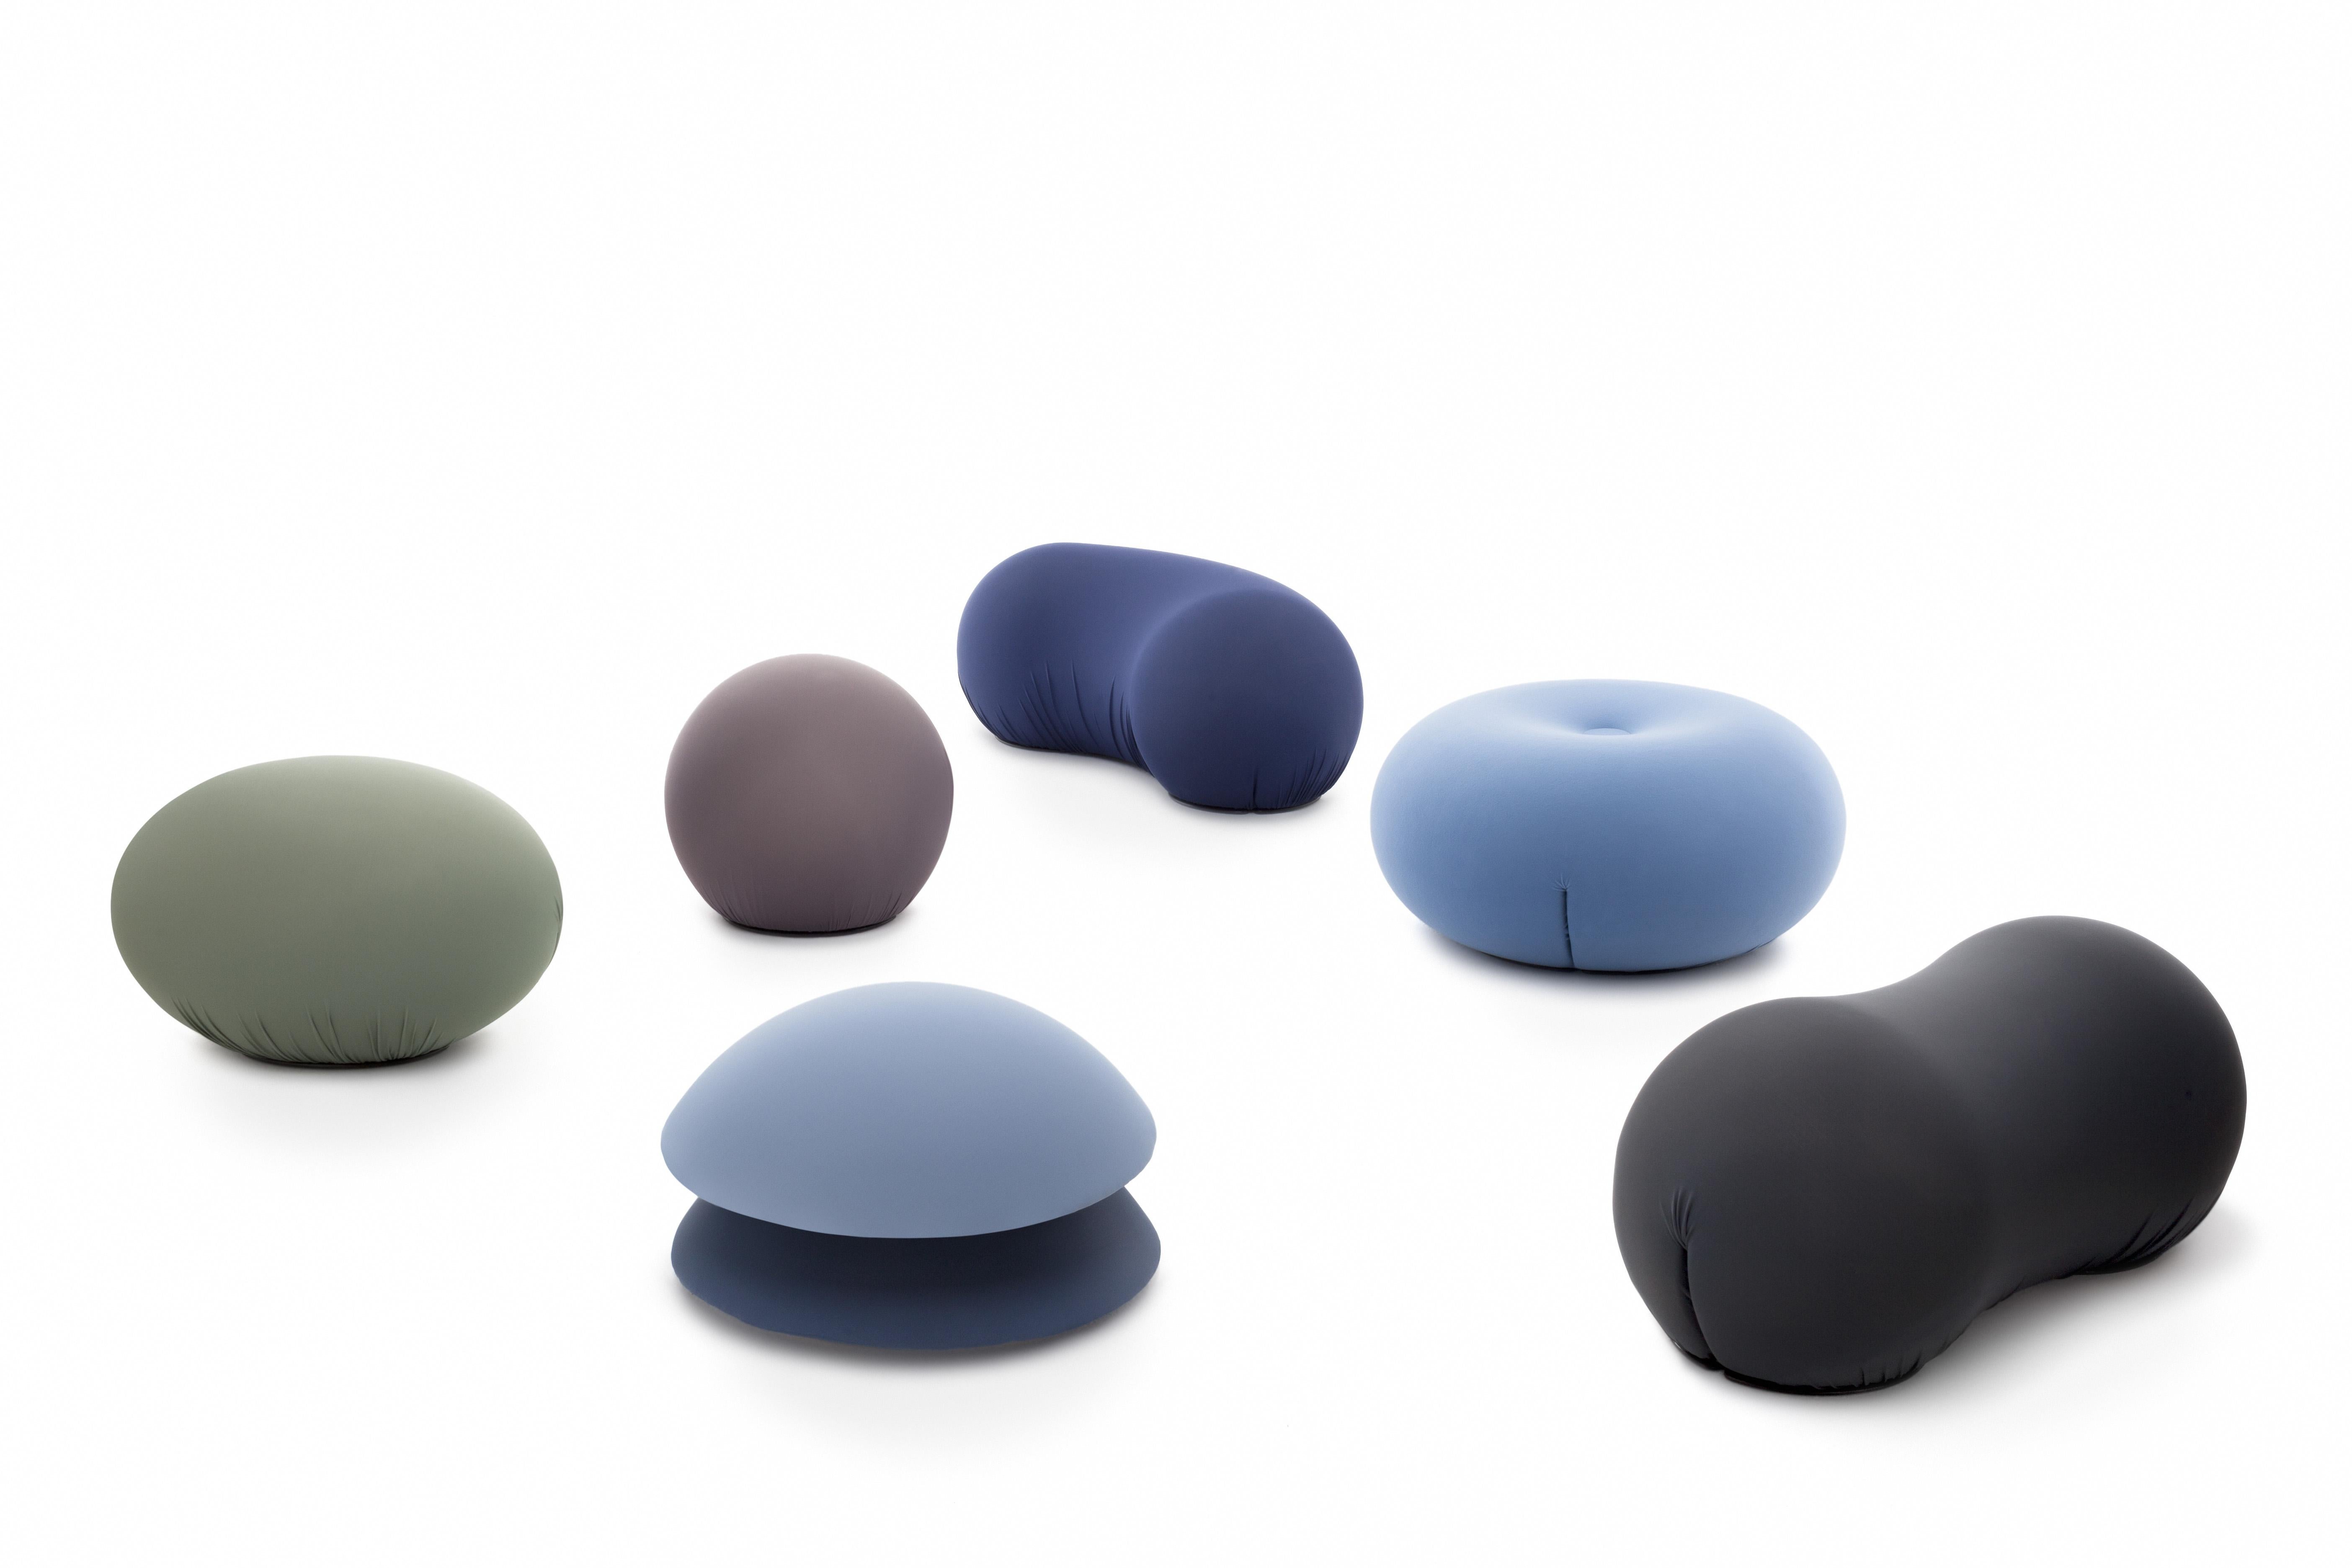 Flexible round-shaped seating in polyurethane with an internal rigid structure. Polyurethane cold-processed without CDC. Two lateral slits keep the removable cover in bi-elastic fabric.